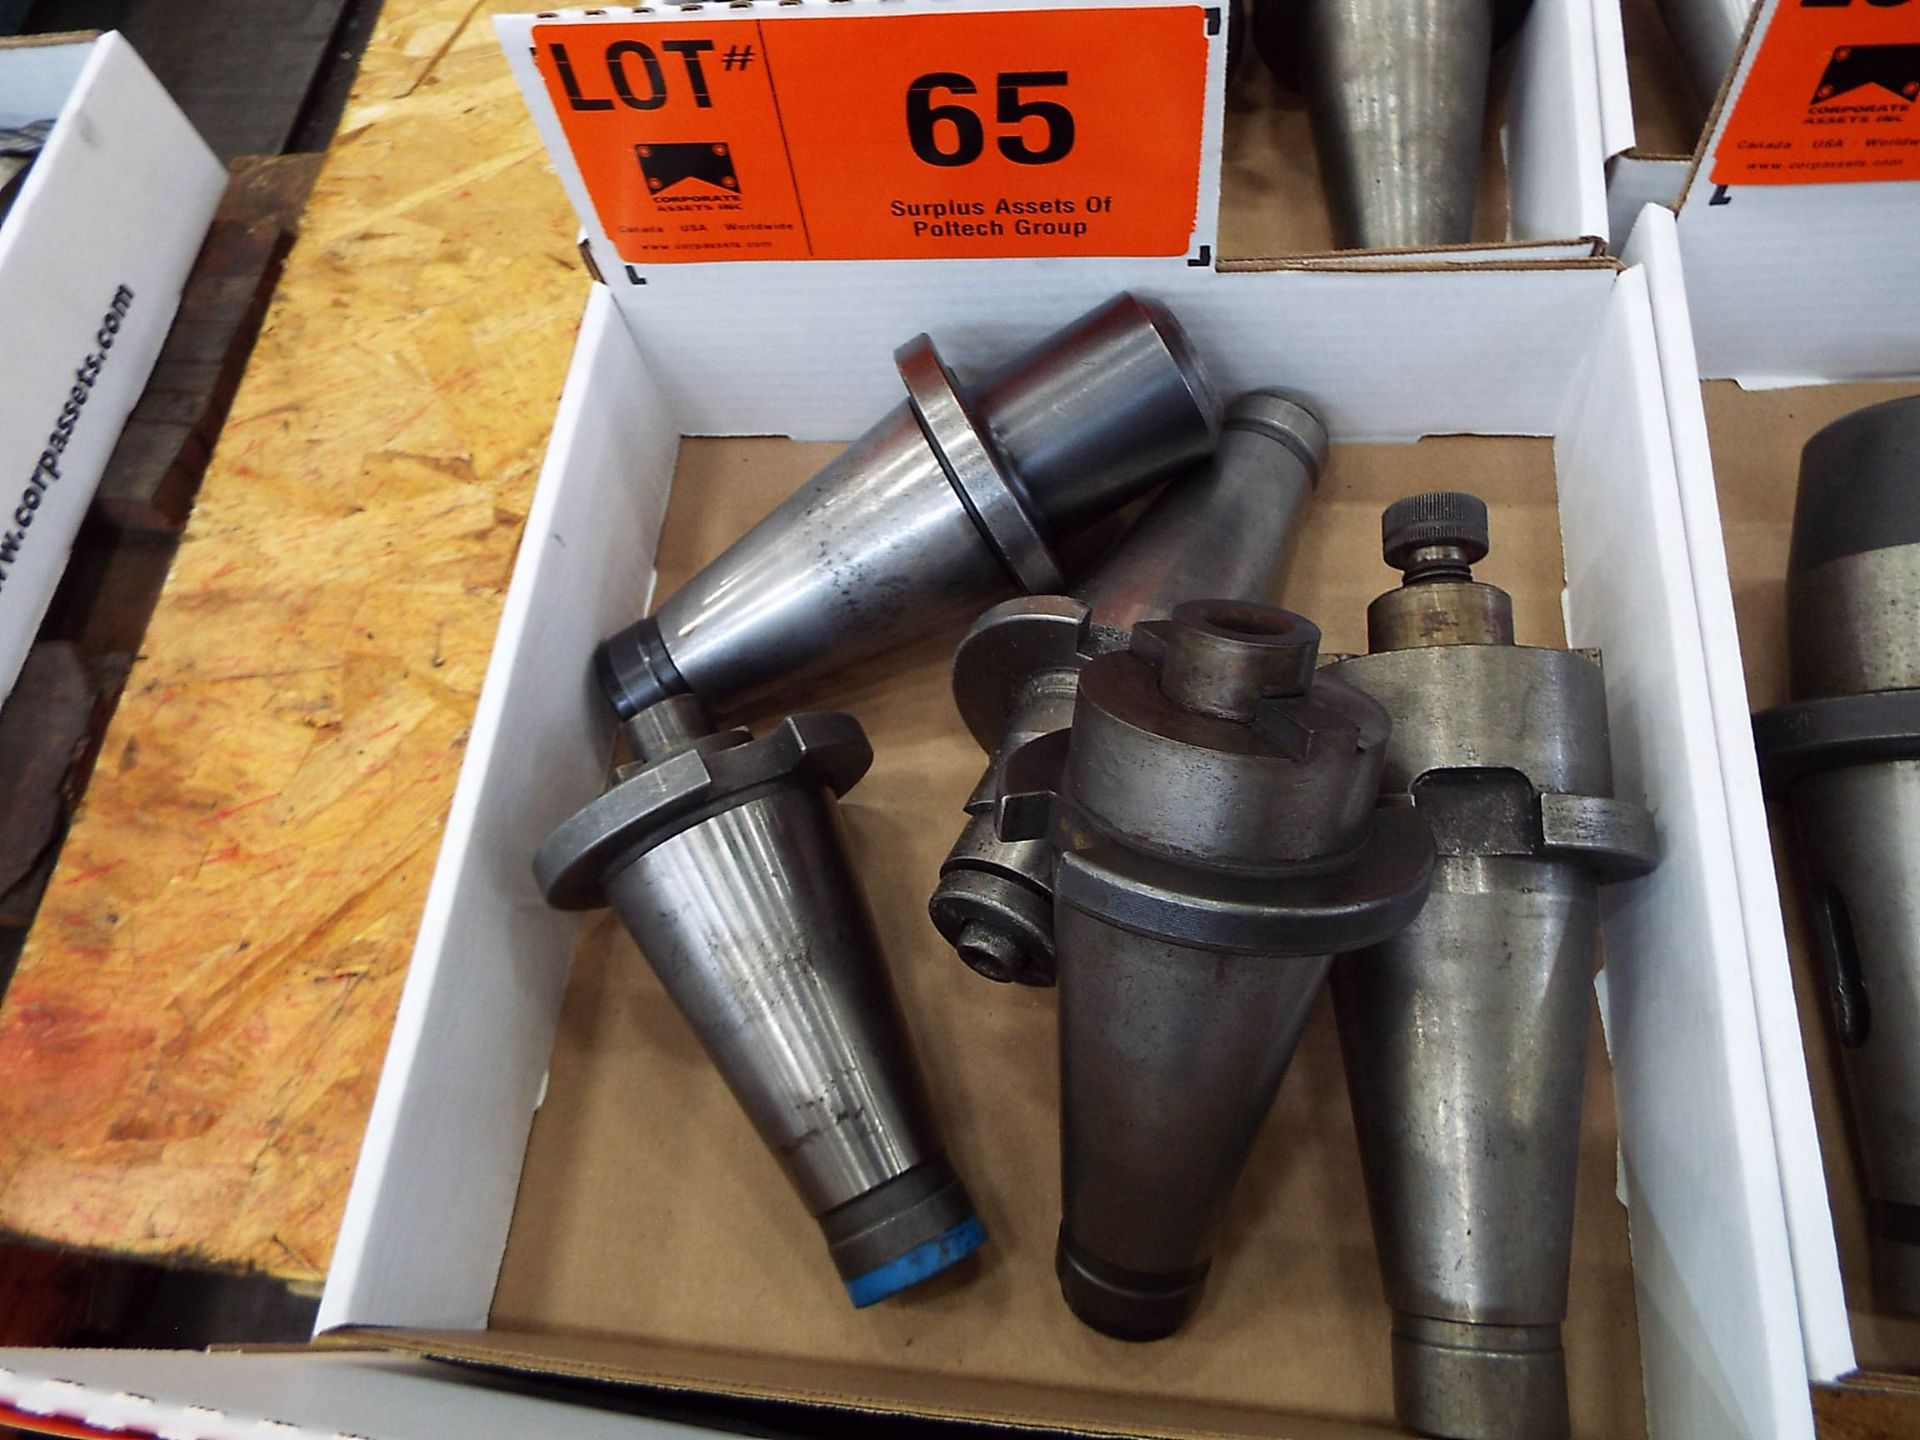 LOT/ (5) 50 TAPER TOOL HOLDERS (LOCATED AT 460 SIGNET DR, NORTH YORK, ON)